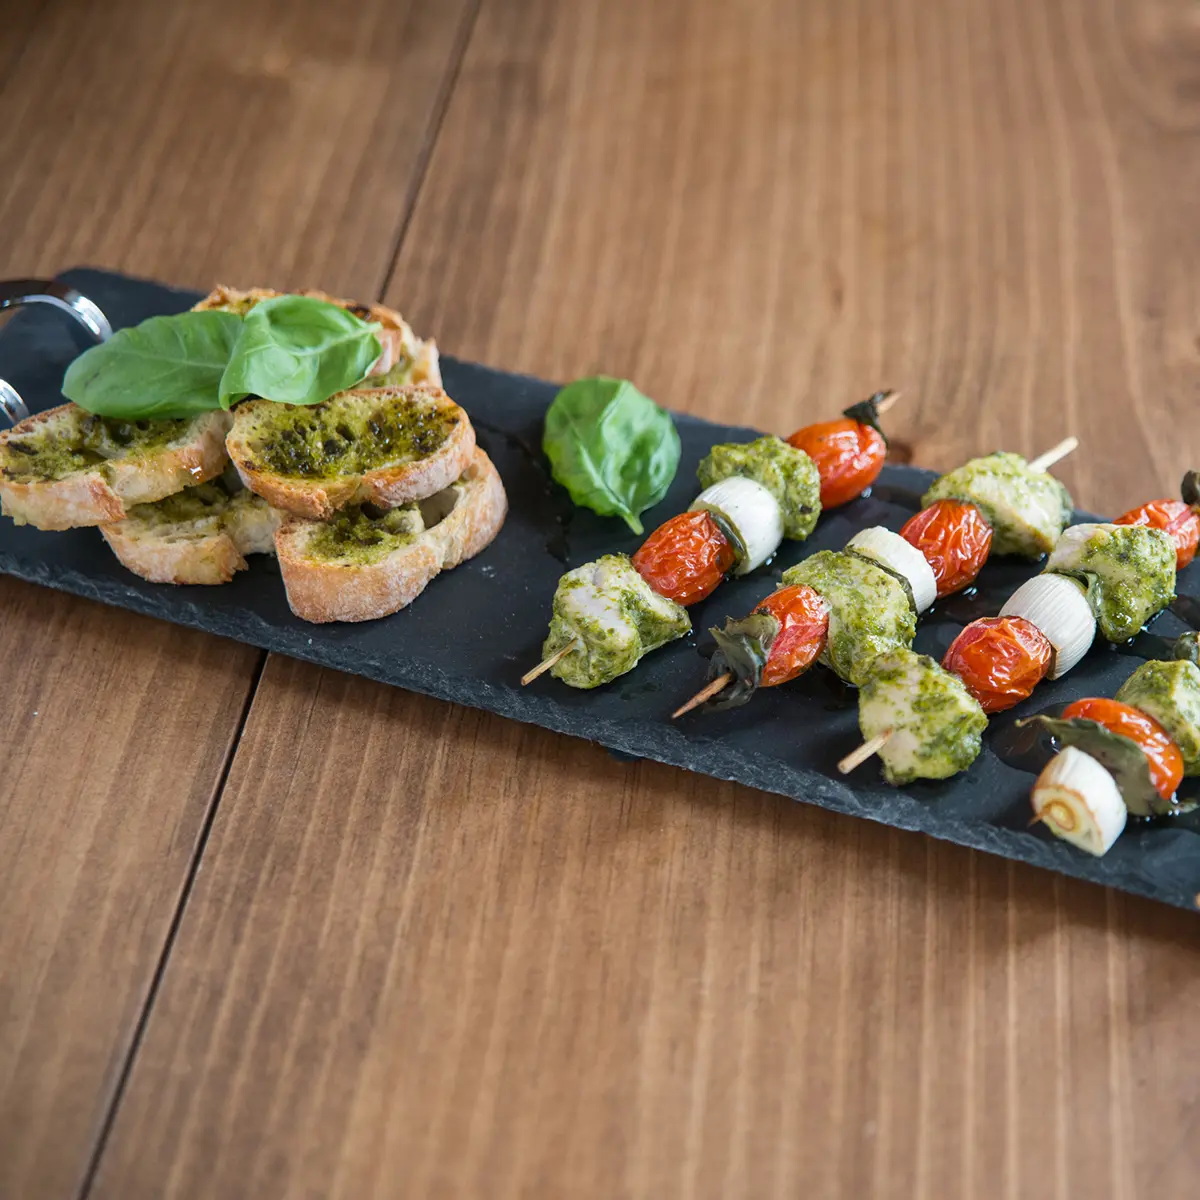 Chicken and leek skewers with pesto and croutons